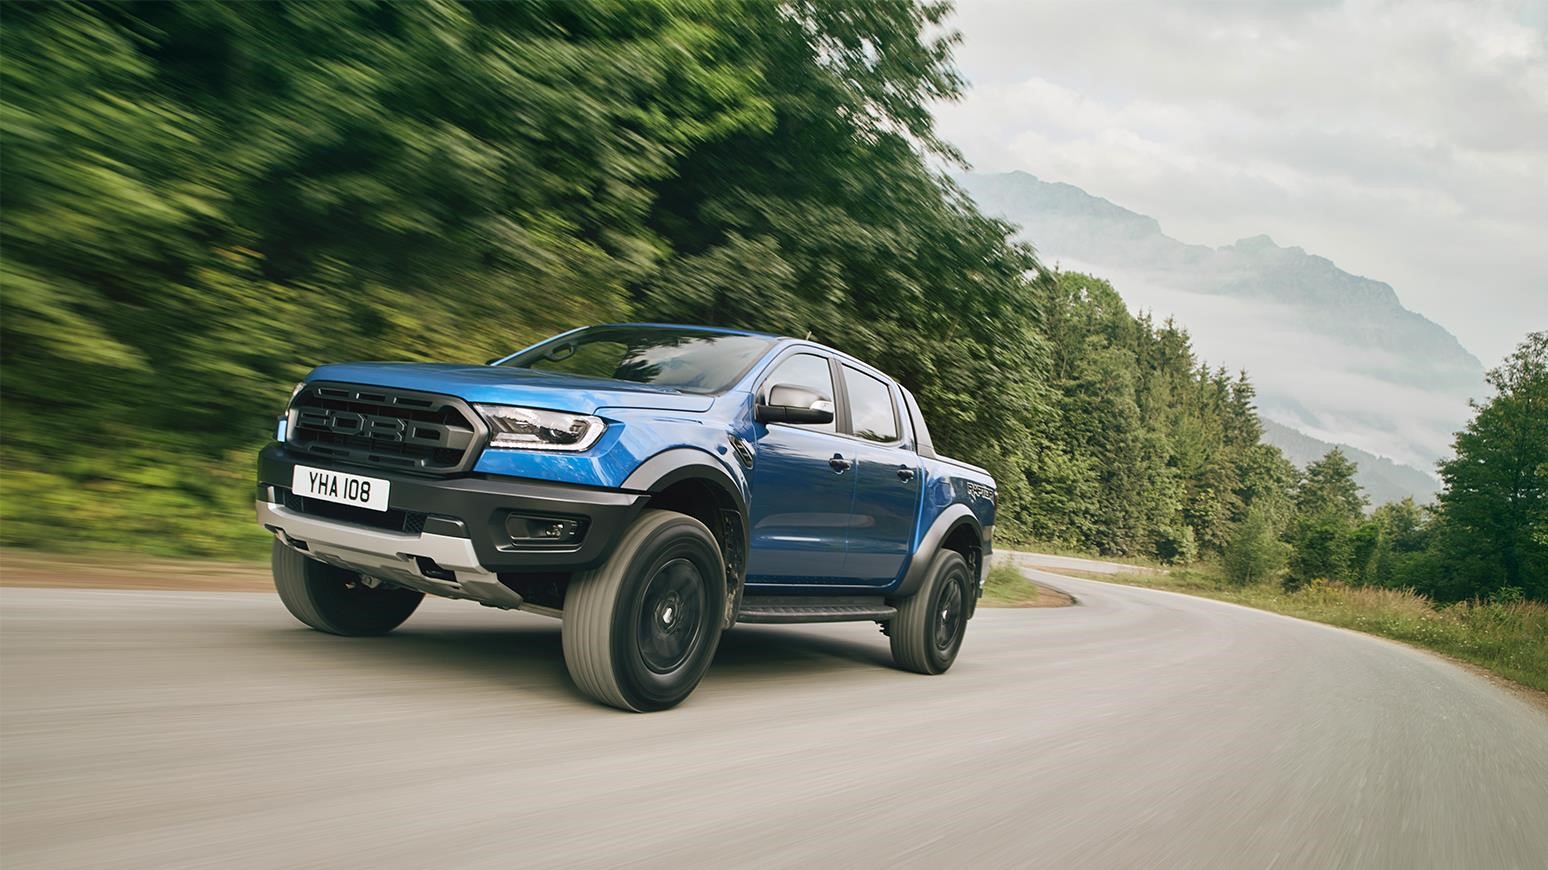 Ford 2019 Ranger Raptor Officially Unveiled At Gamescom Event In Cologne, Germany